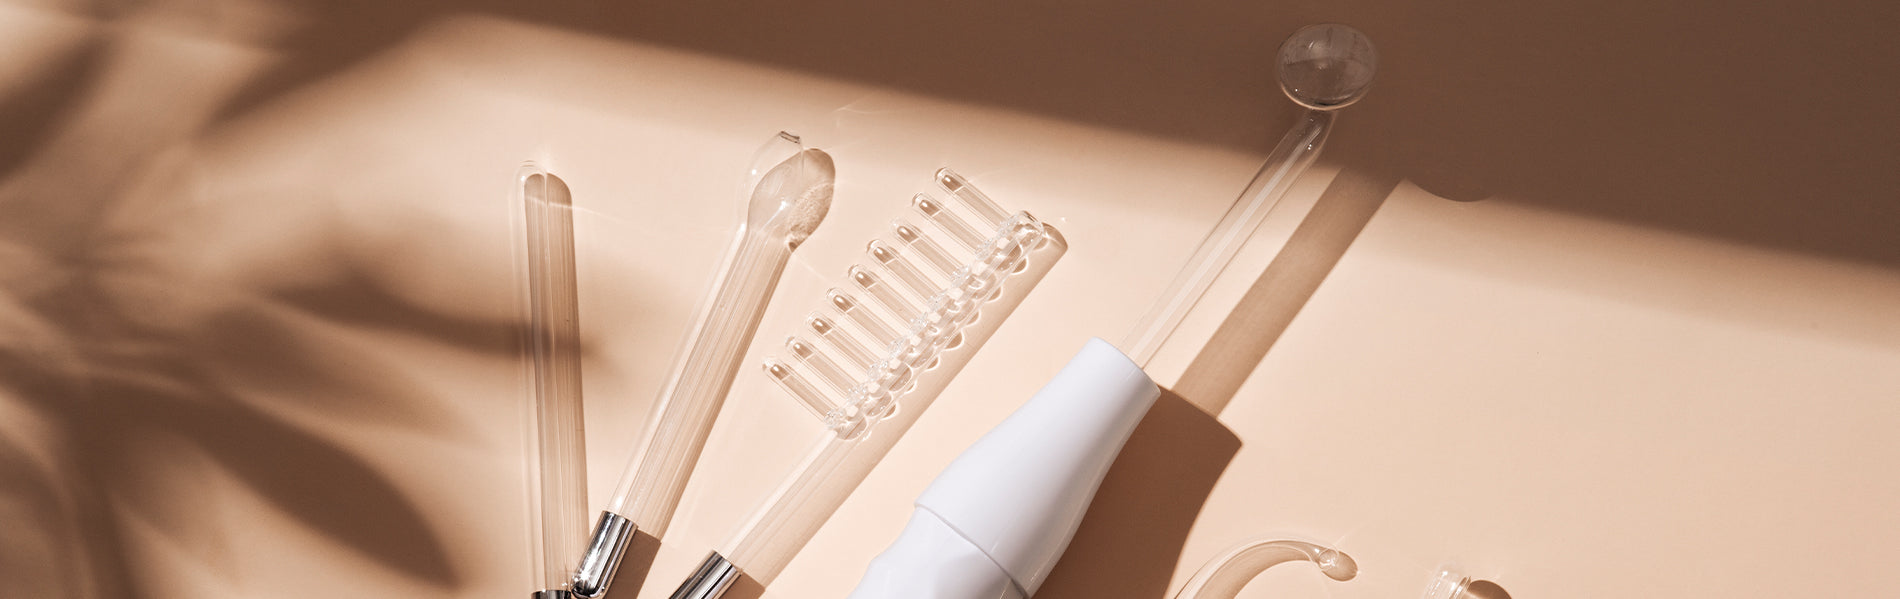 Must-Try Innovative Skincare Tools That Should Be On Your List